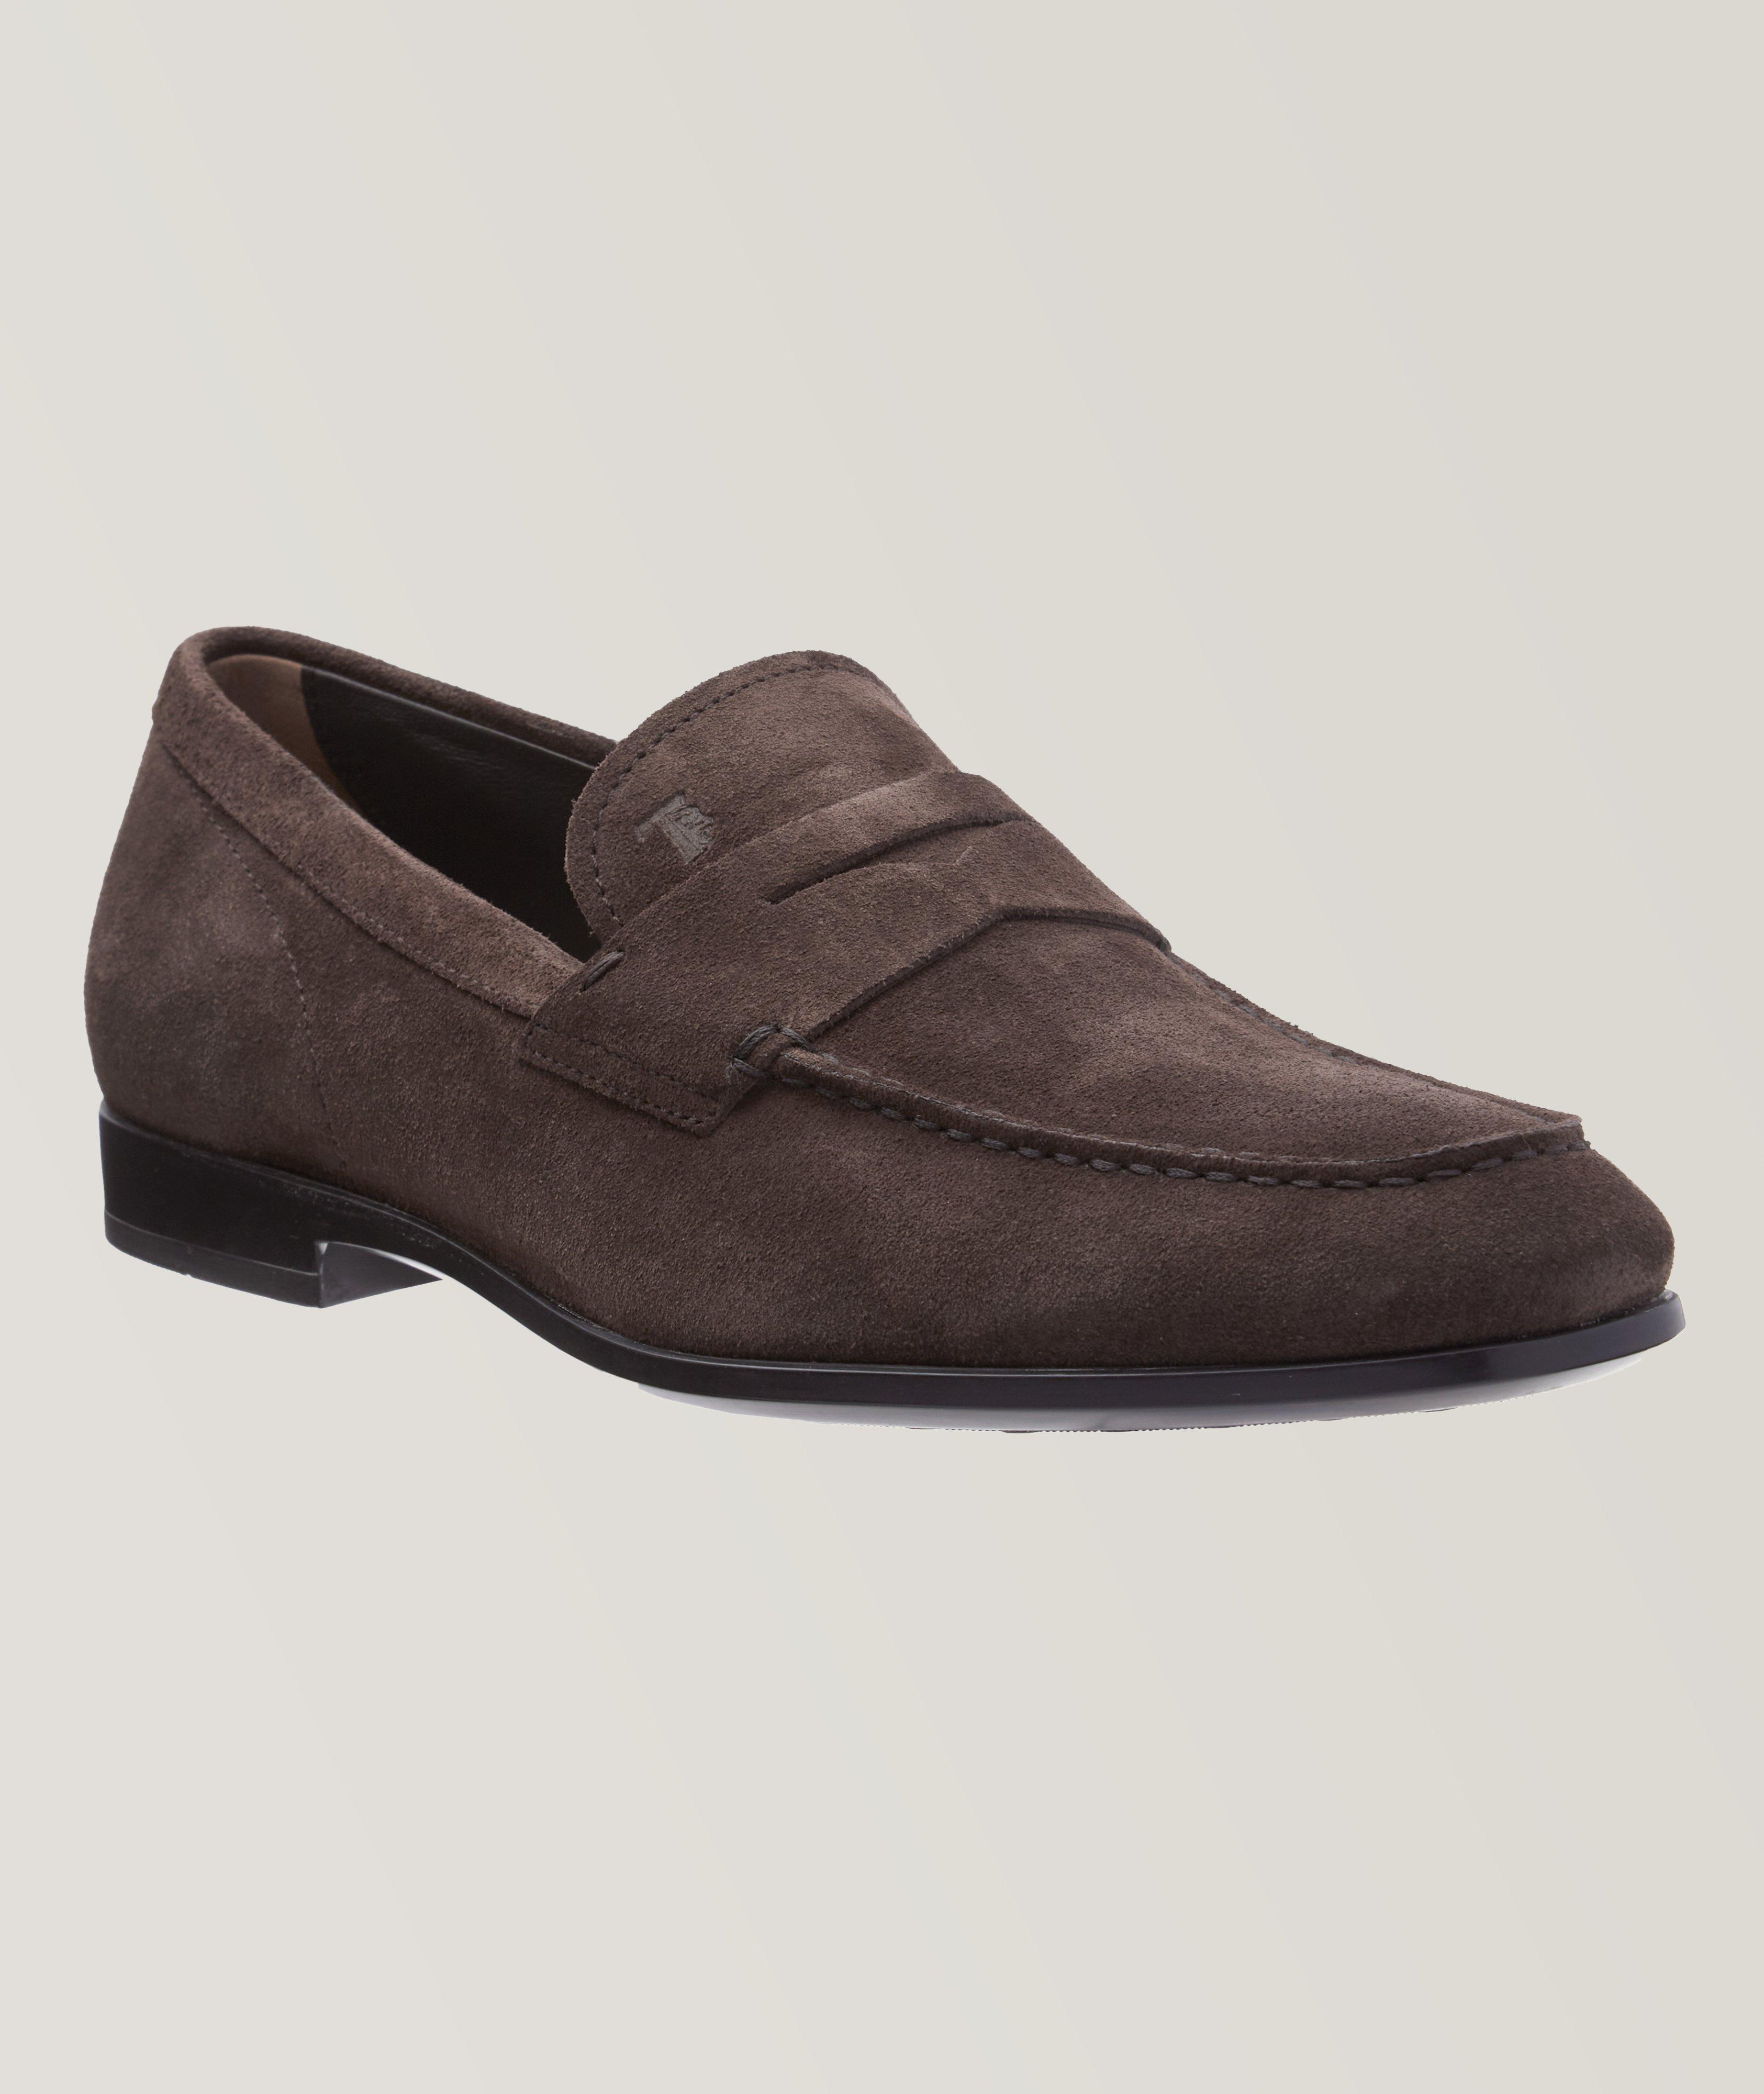 Suede Penny Loafers image 0